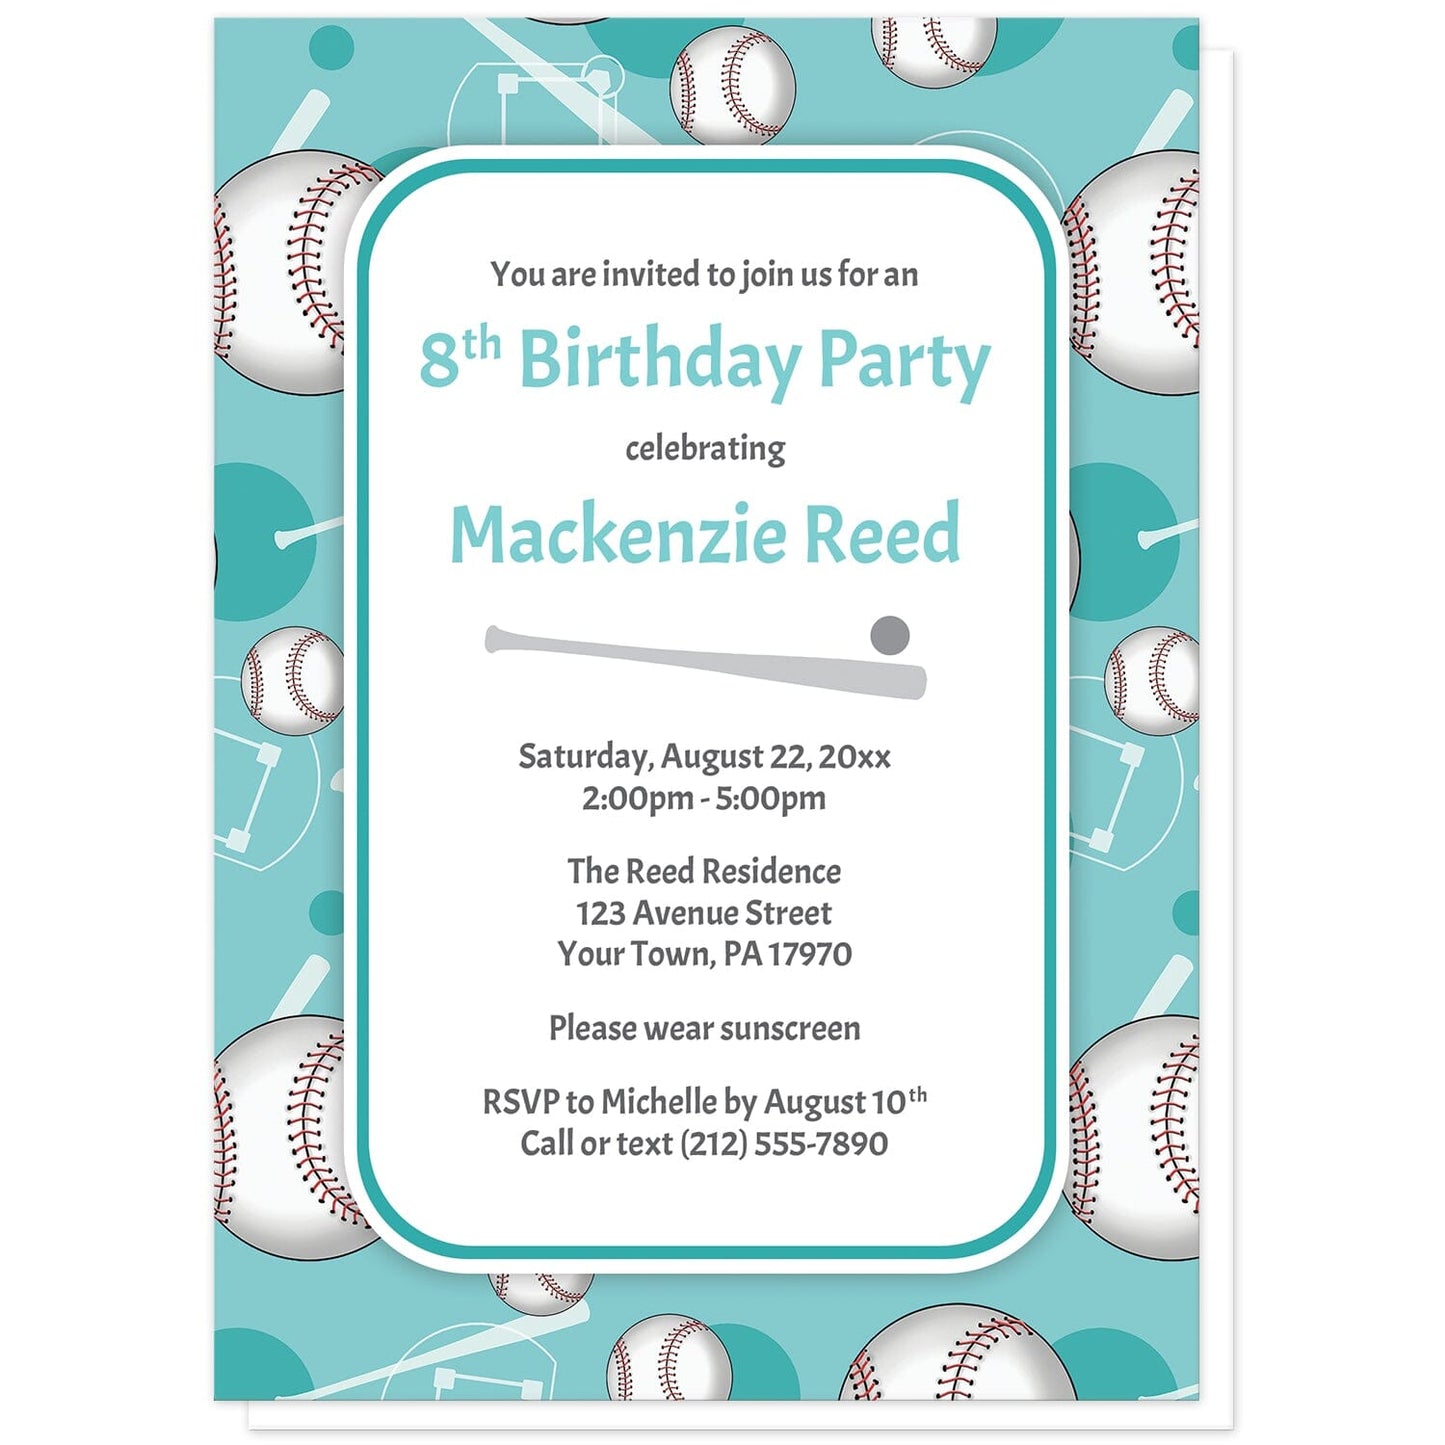 Baseball Themed Teal Pattern Birthday Party Invitations at Artistically Invited. Baseball themed teal pattern birthday party invitations for any age or milestone that are uniquely illustrated with a baseball pattern with baseballs, baseball bats, and baseball diamonds, over a teal background color. Your personalized birthday party details are custom printed in teal and gray over white in the center. 